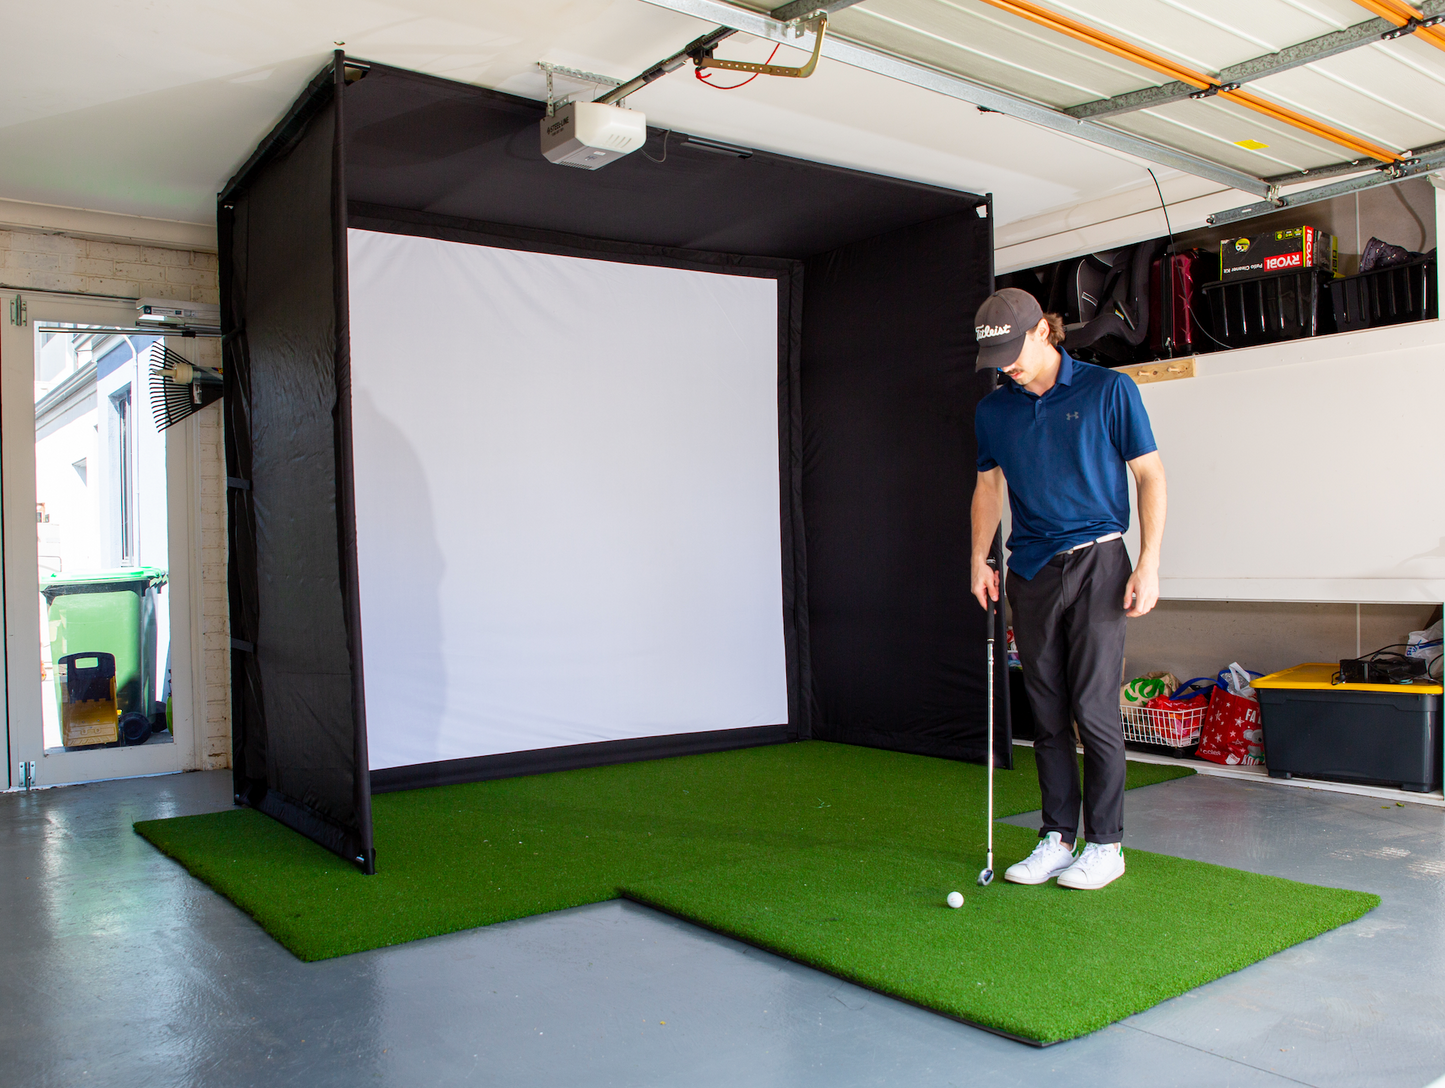 24/7 Golf Enclosure Package with Golf Trak